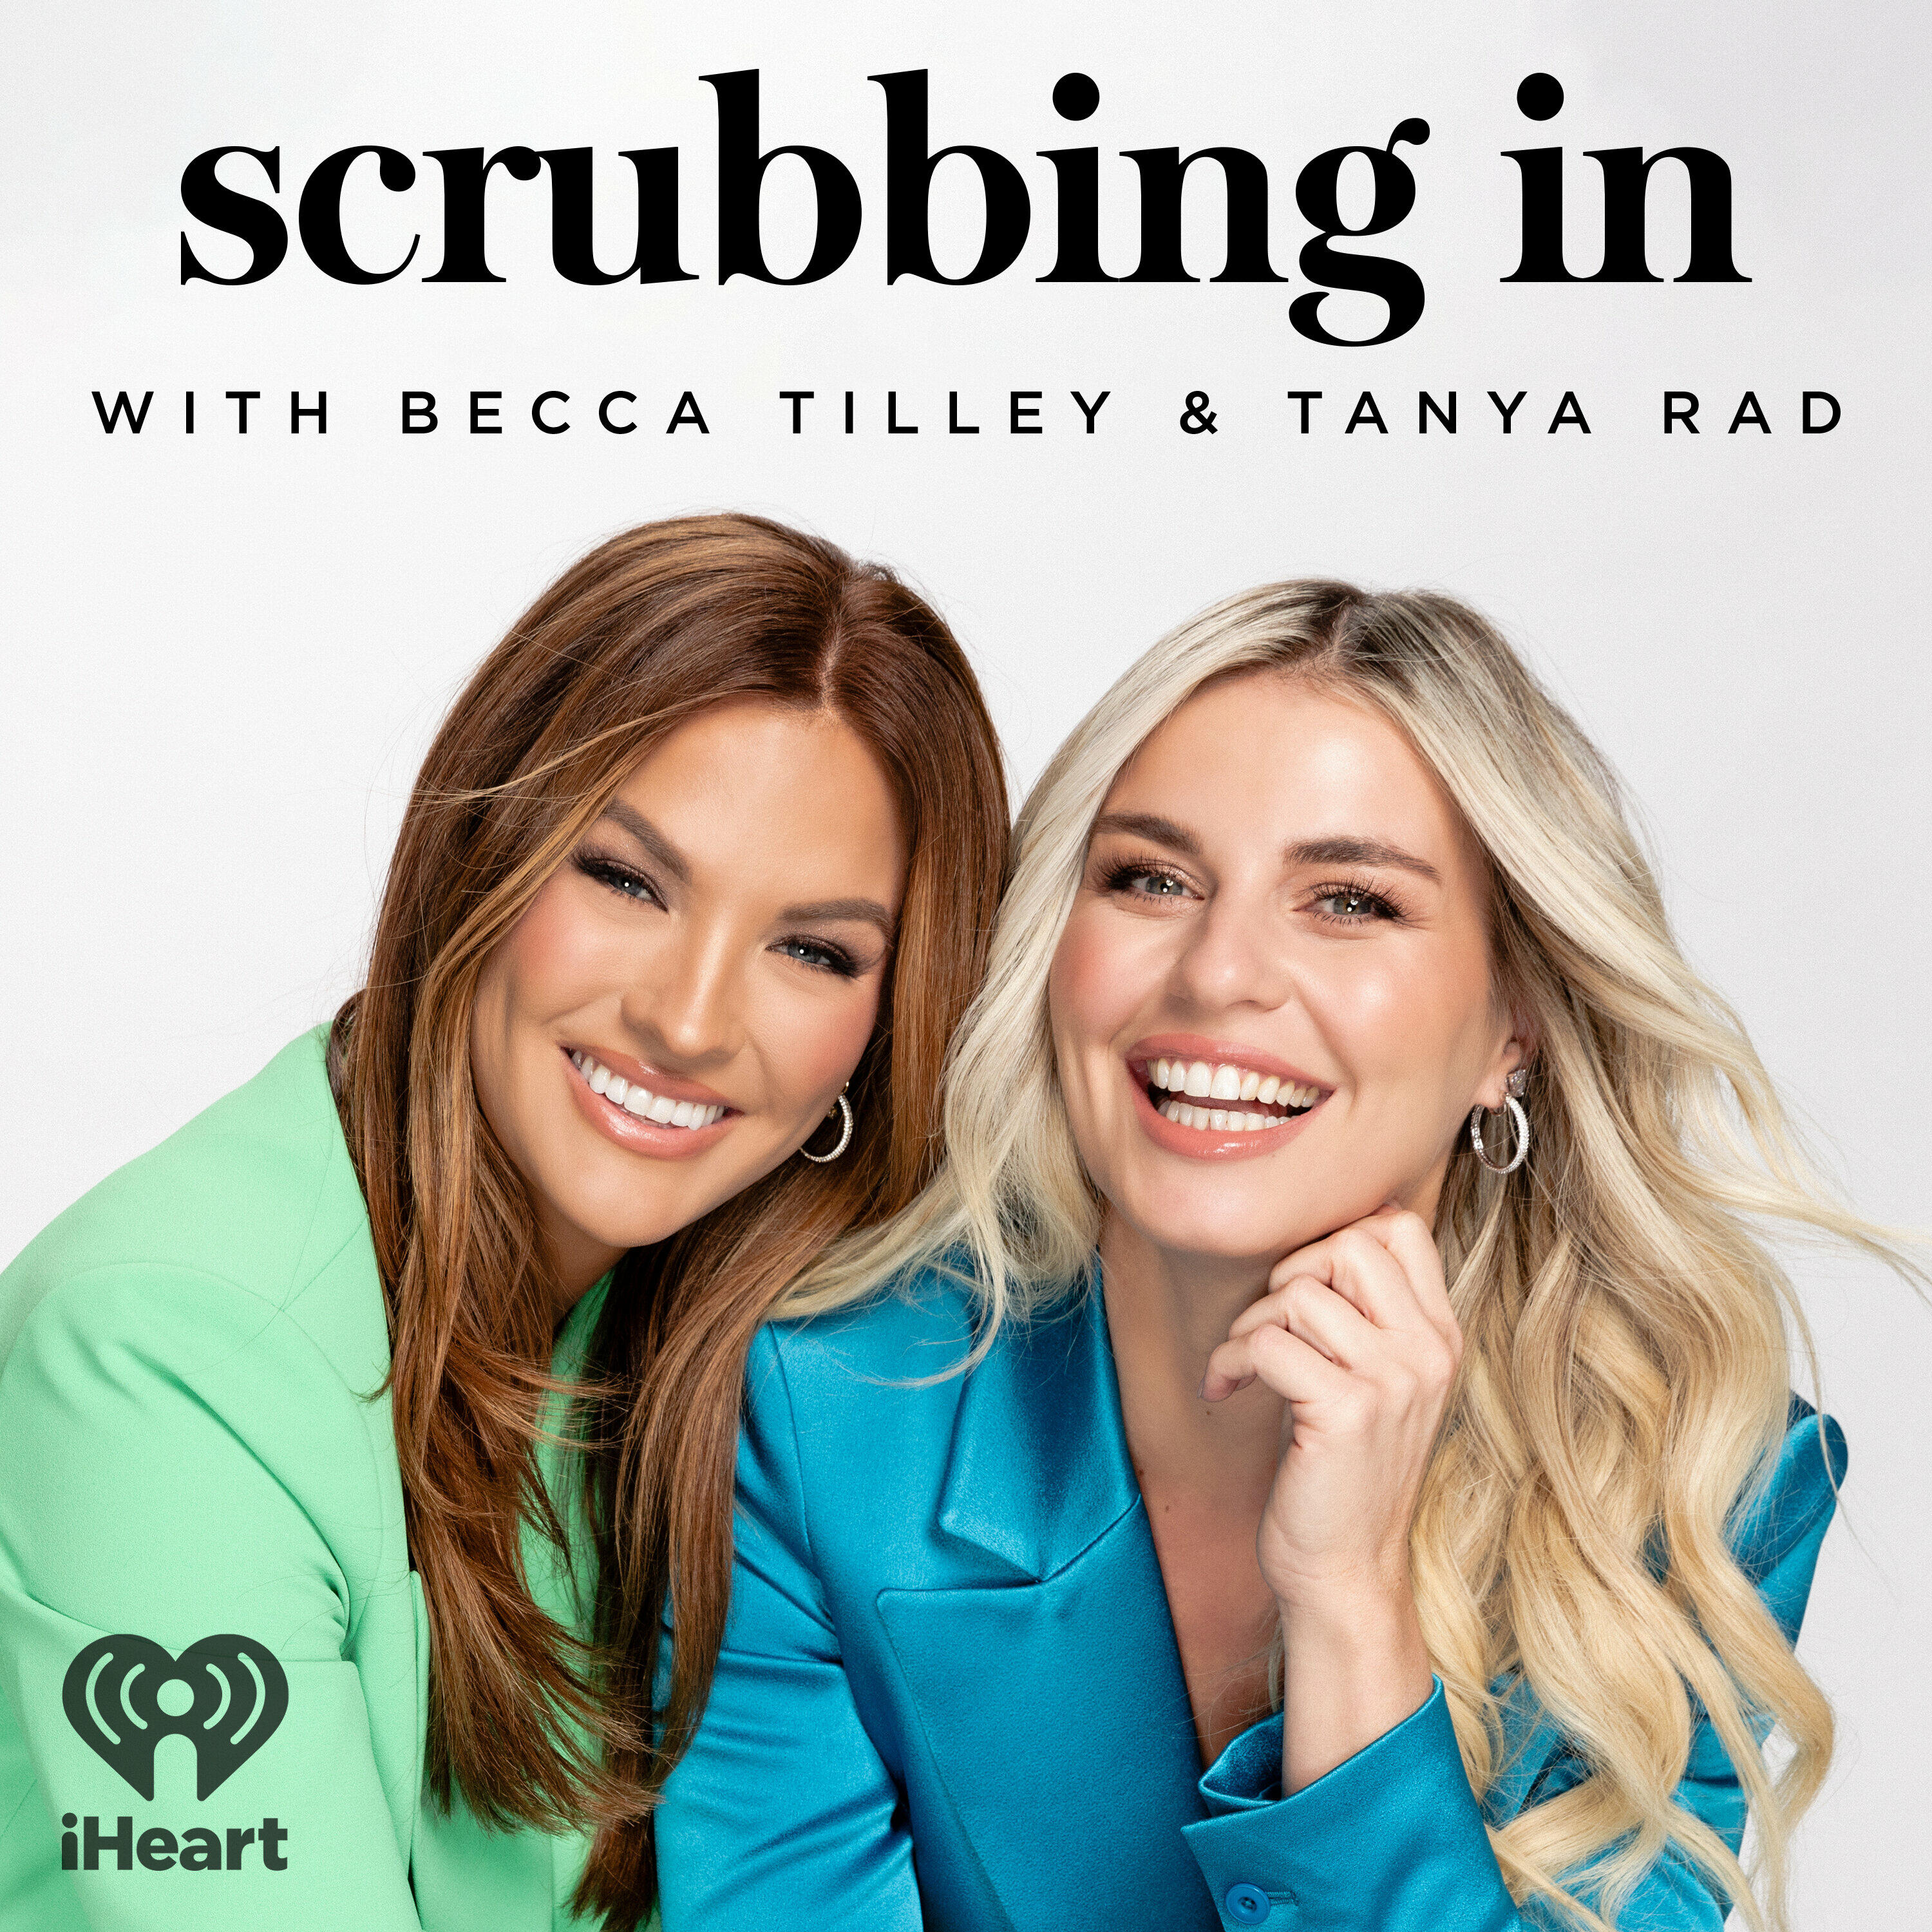 Scrubbing In with Becca Tilley & Tanya Rad: Scrub in the Office on